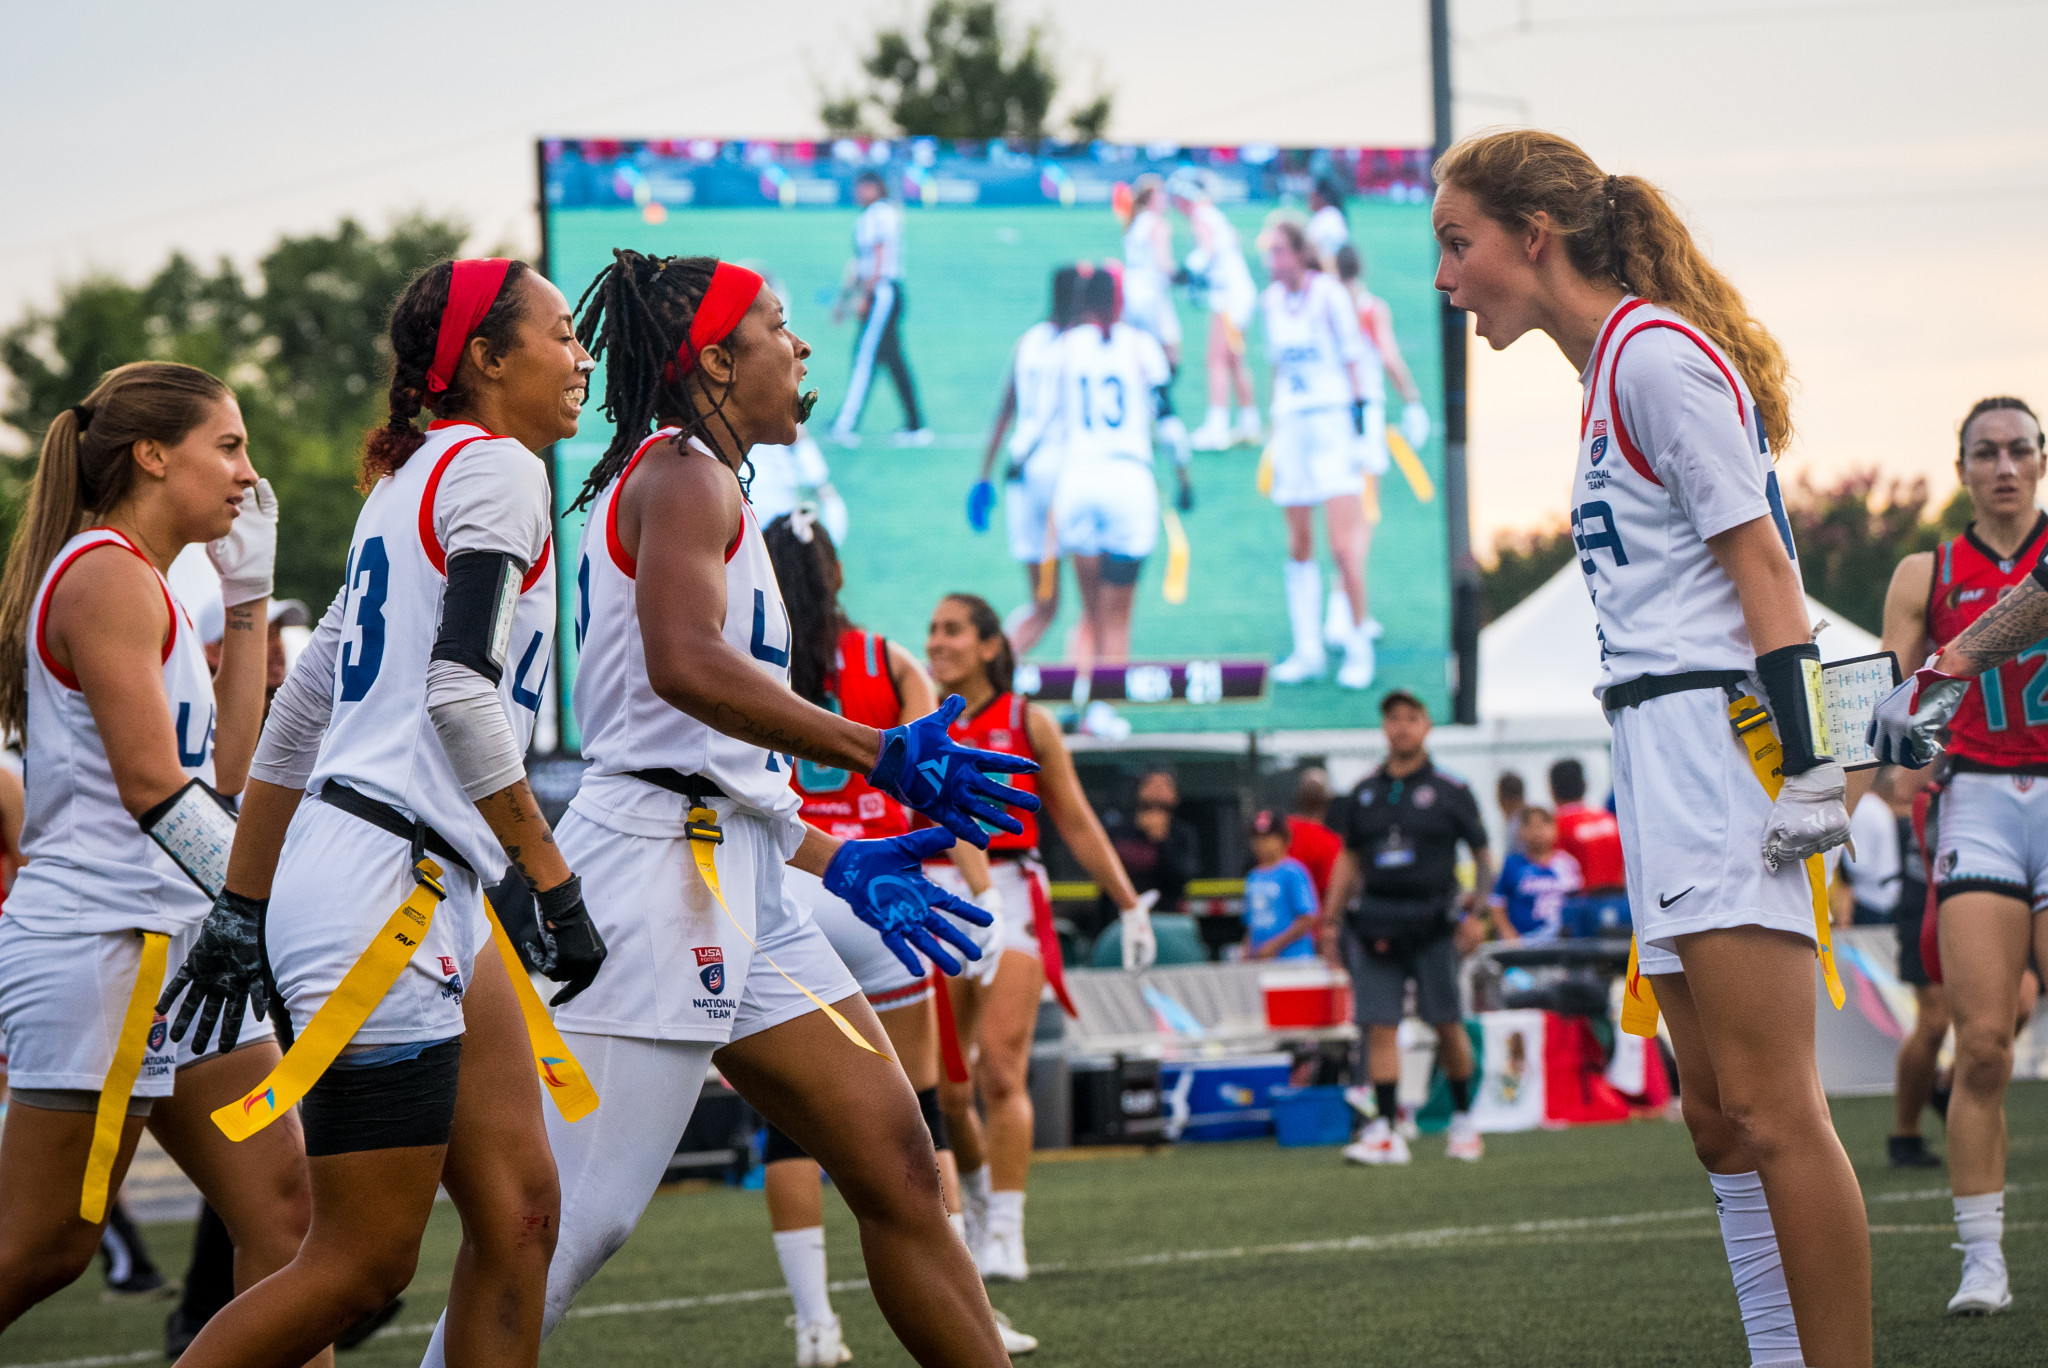 Flag football is hoping to seal a spot at the Los Angeles 2028 Olympic Games ©IFAF